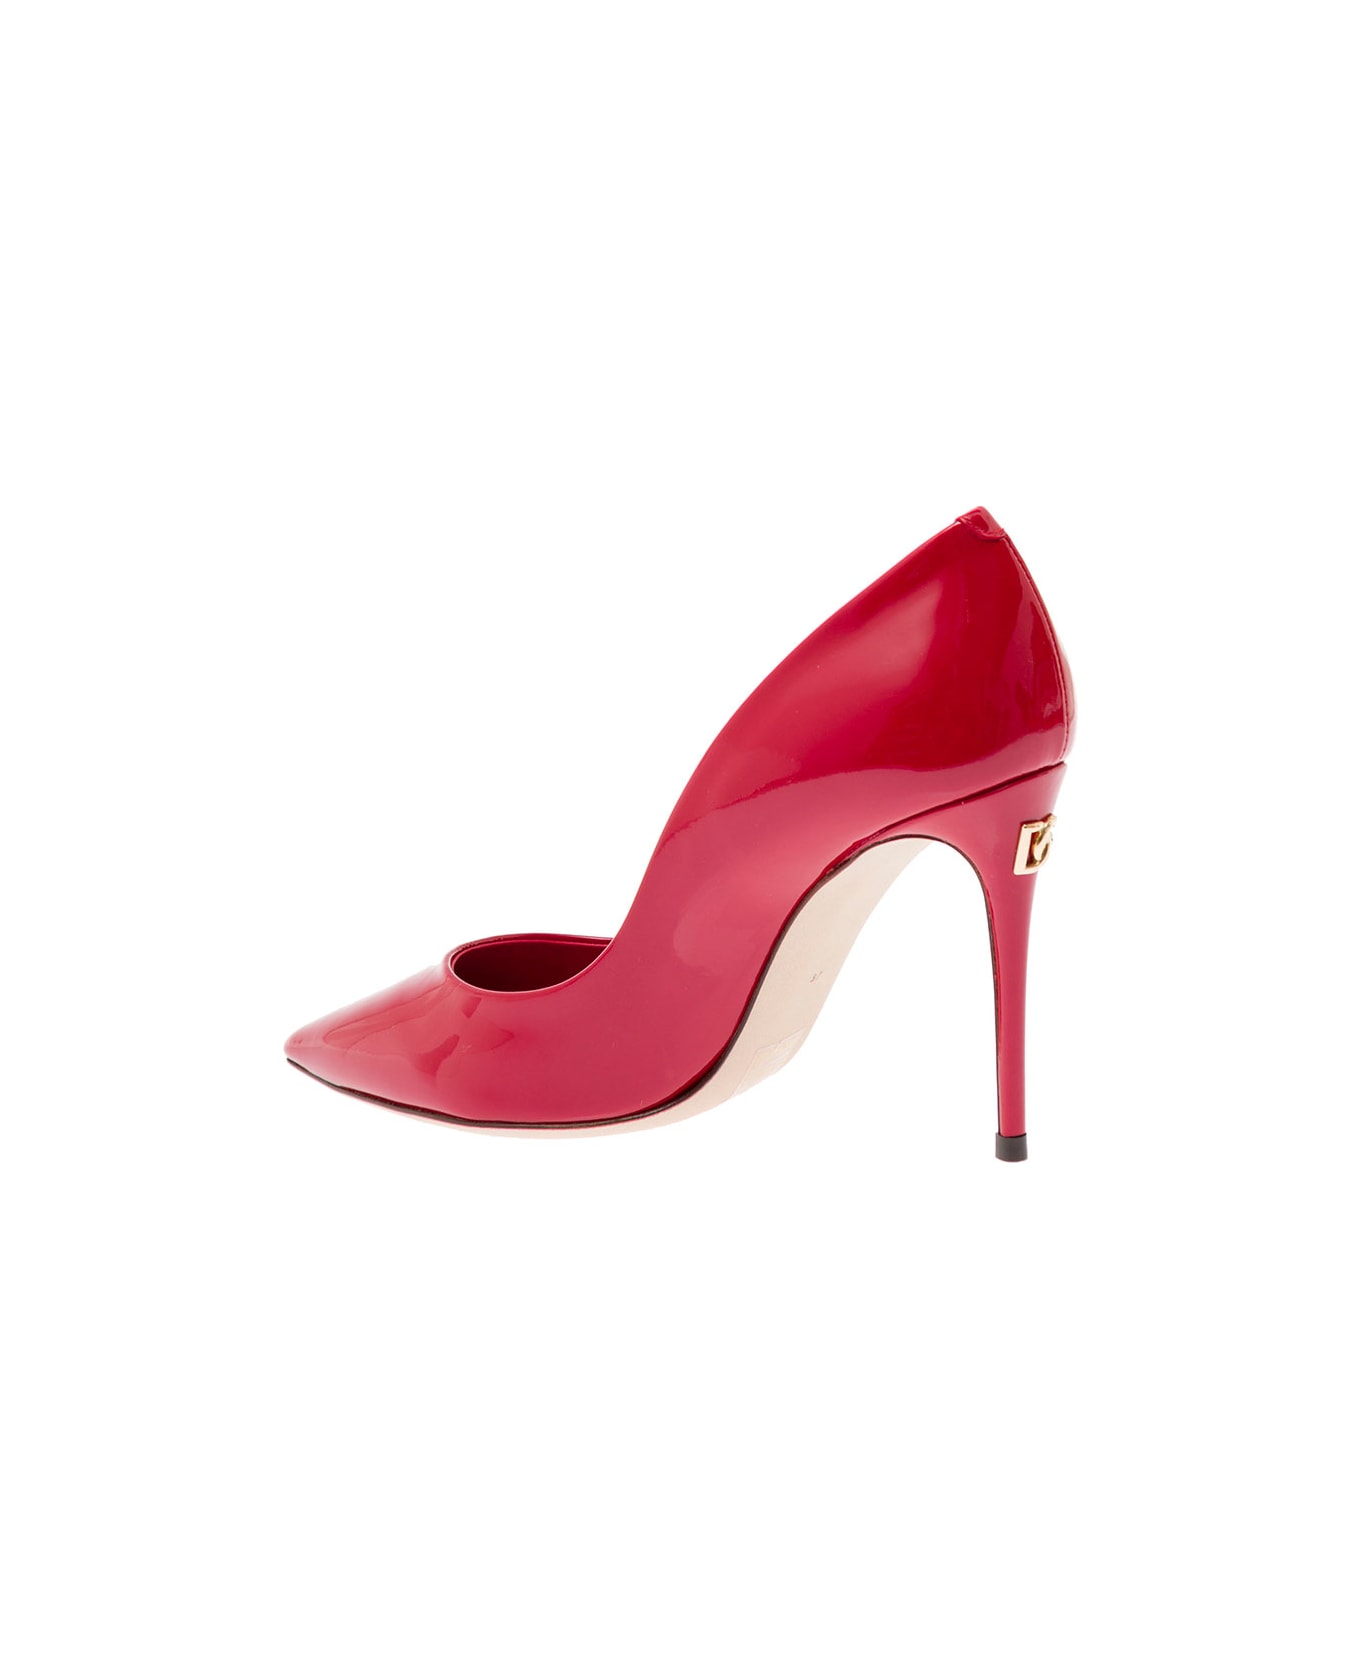 Dolce & Gabbana Cardinal Red  Pumps In Patent Leather Dolce & Gabbana Woman - Red